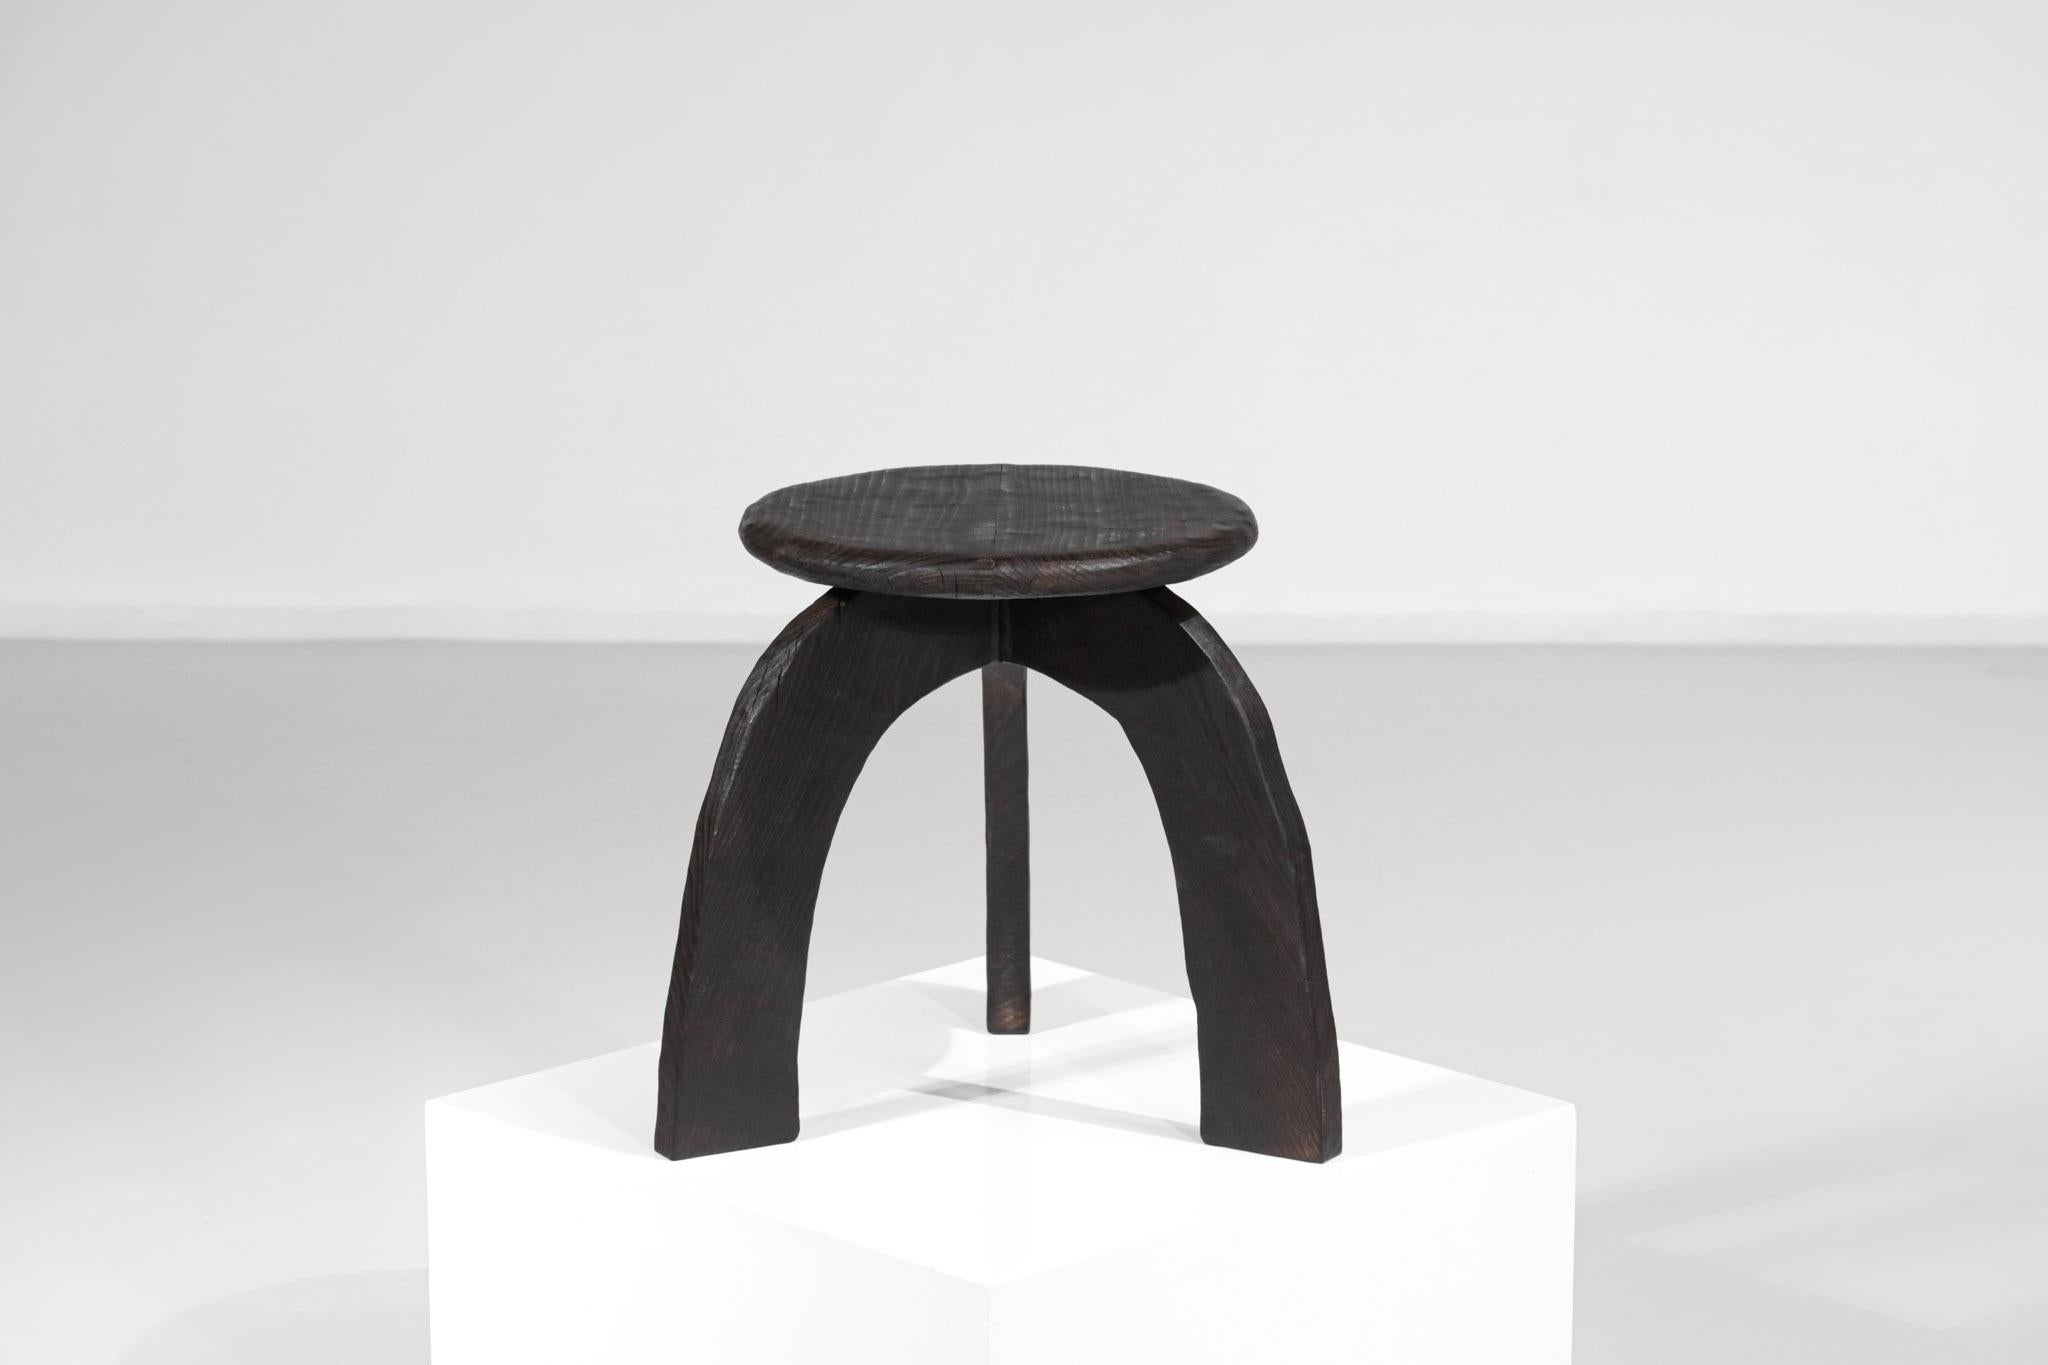 Danke galerie is pleased to present the latest creation of the cabinetmaker Vincent Vincent. This Ethnic inspired stool in solid beech wood will bring a unique touch to your decoration. Designed with quality, comfort and sturdiness in mind, each